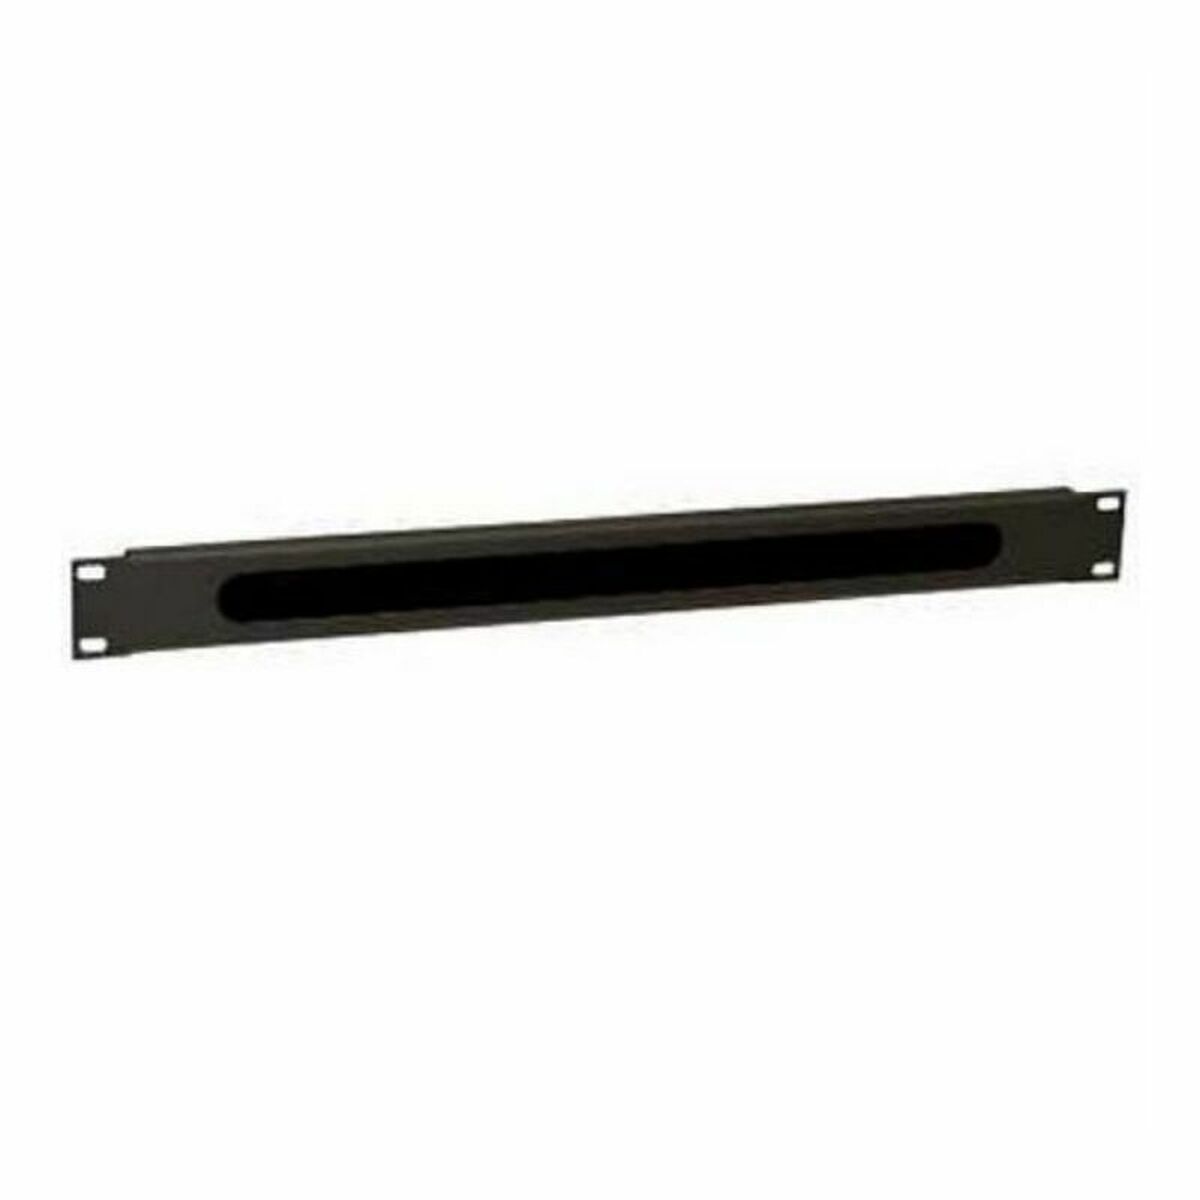 Wiring Guide for Rack Cabinet WP WPN-ACM-201-B Black, WP, Computing, Accessories, wiring-guide-for-rack-cabinet-wp-wpn-acm-201-b-black, Brand_WP, category-reference-2609, category-reference-2803, category-reference-2828, category-reference-t-19685, category-reference-t-19908, Condition_NEW, furniture, networks/wiring, organisation, Price_20 - 50, Teleworking, RiotNook